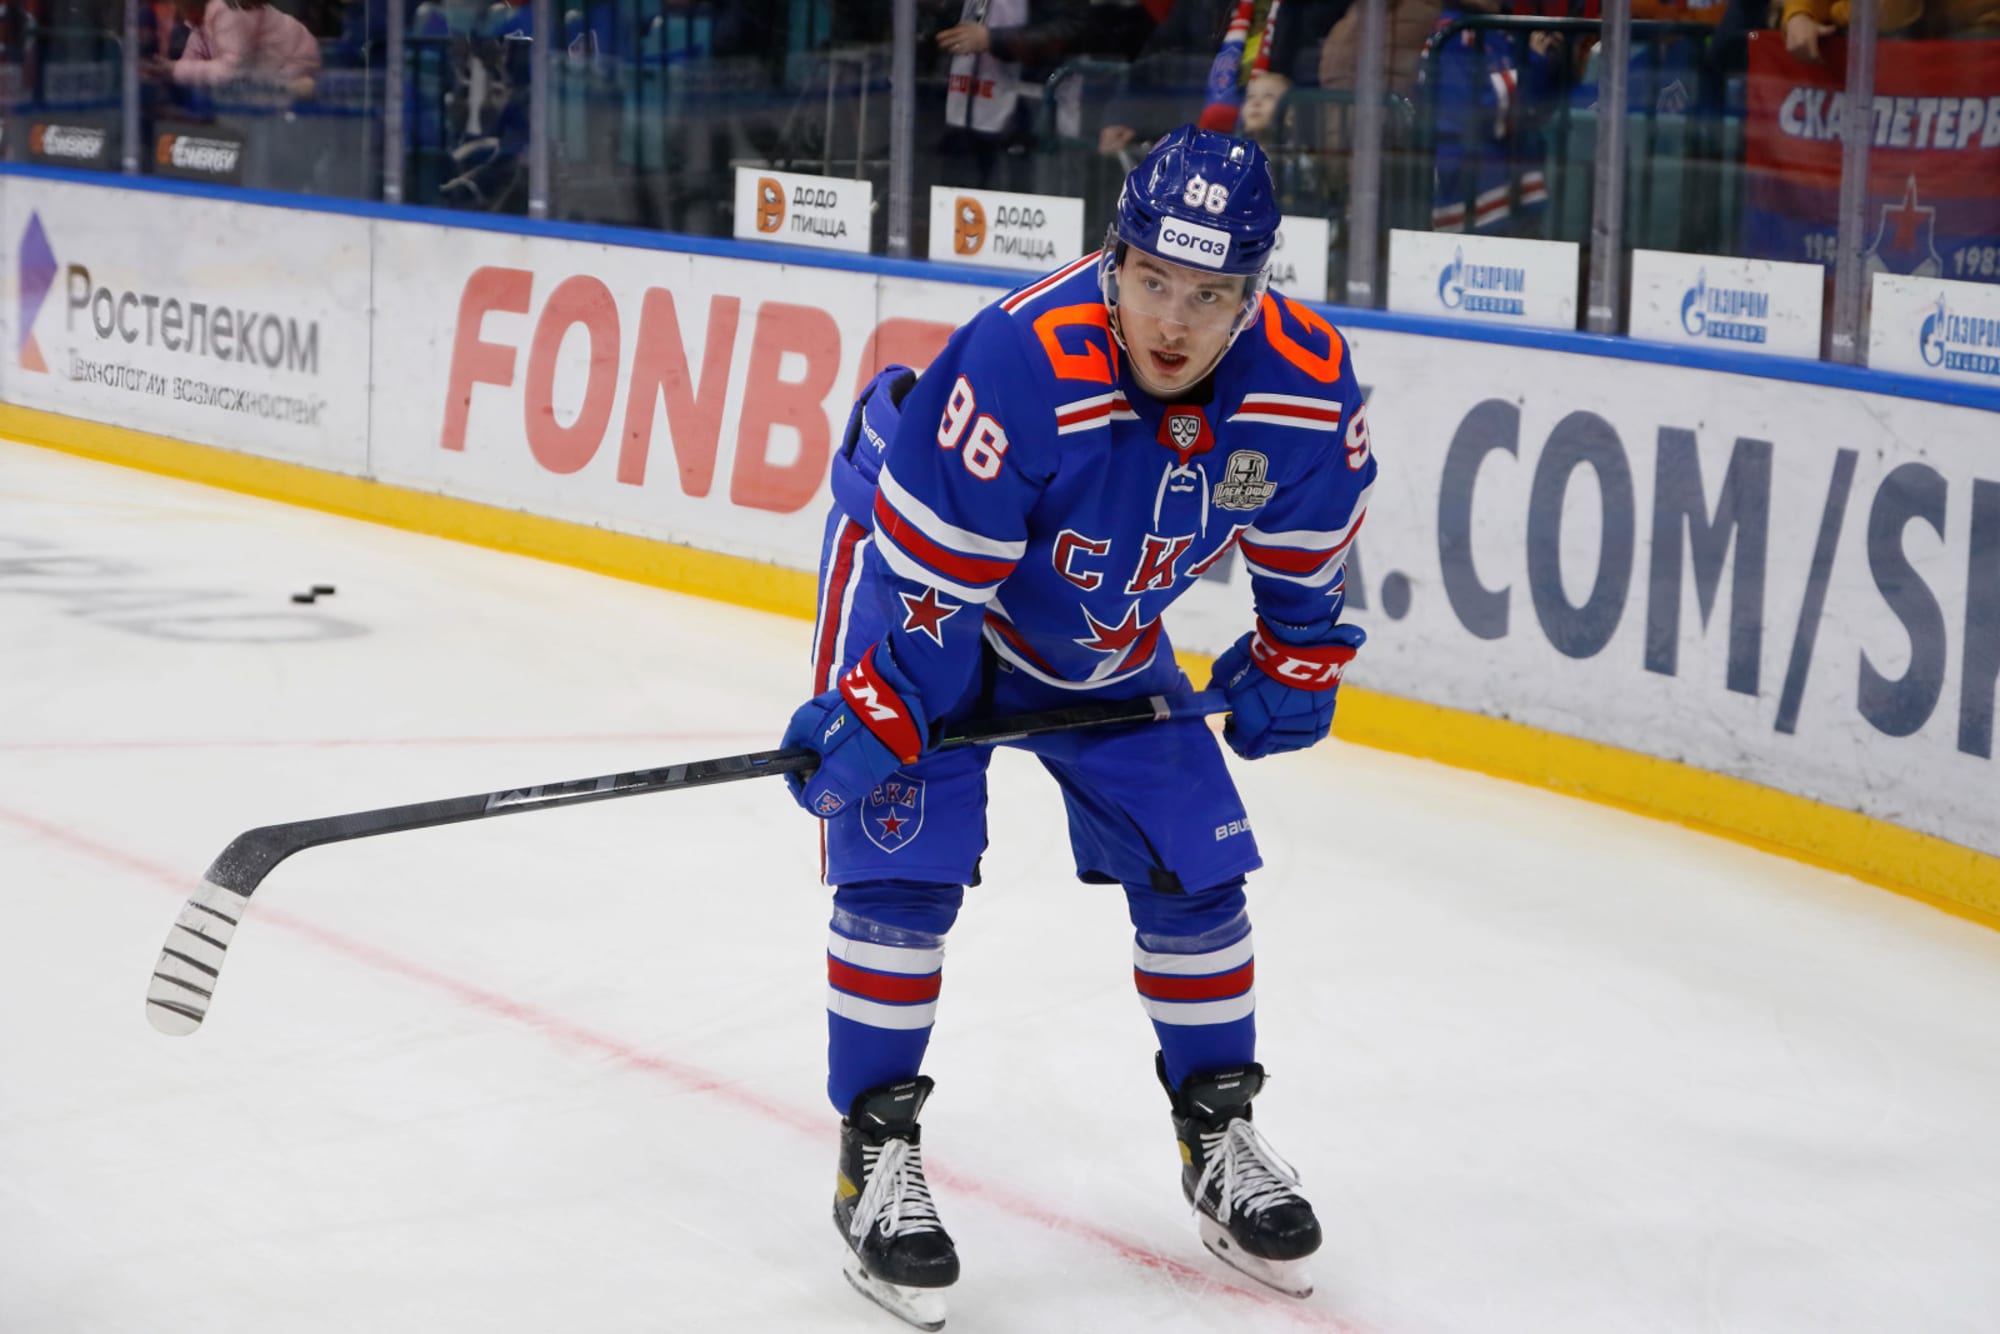 Canucks confirm they will be signing top KHL forward Andrei Kuzmenko